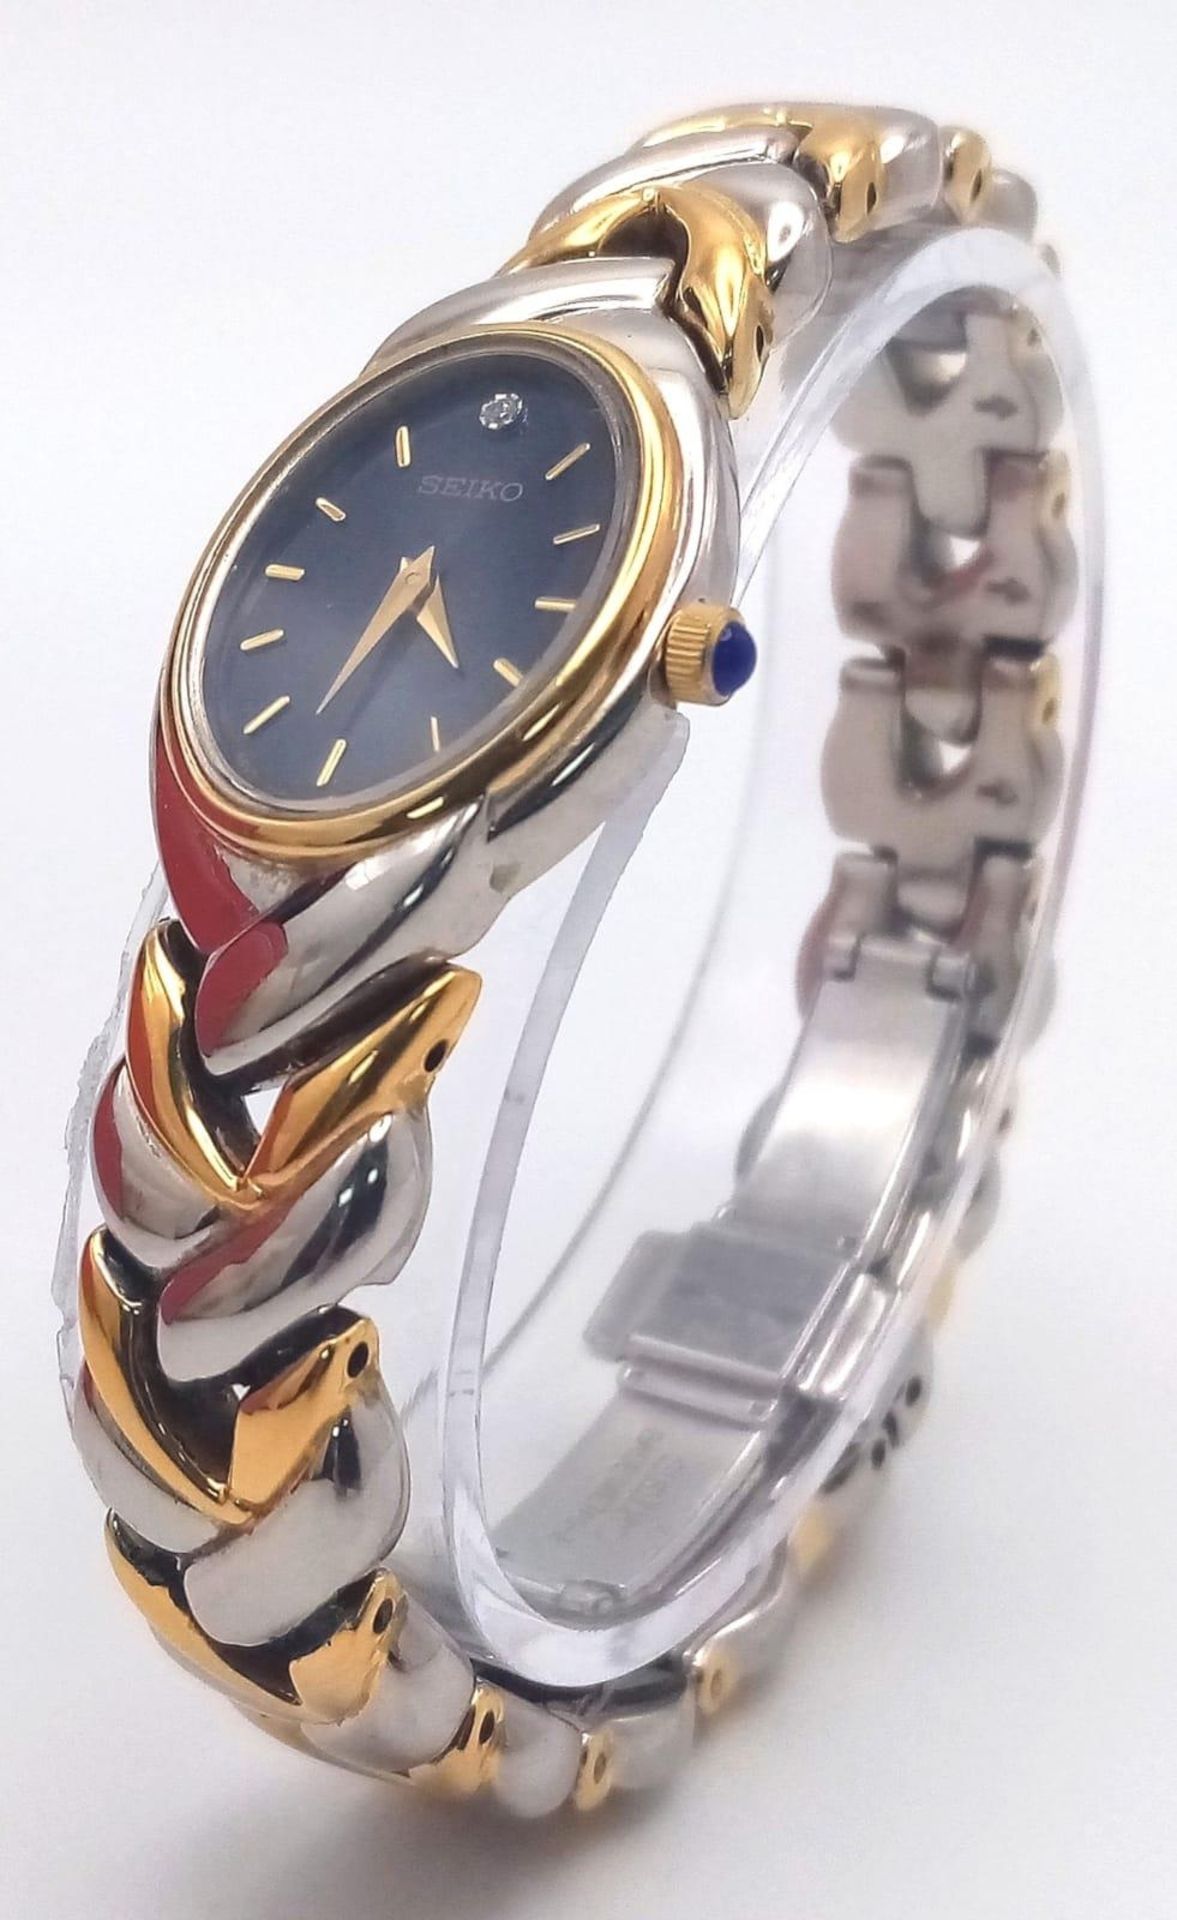 A Seiko Quartz Ladies Watch. Two tone strap and case - 19cm. Blue dial. In good condition and